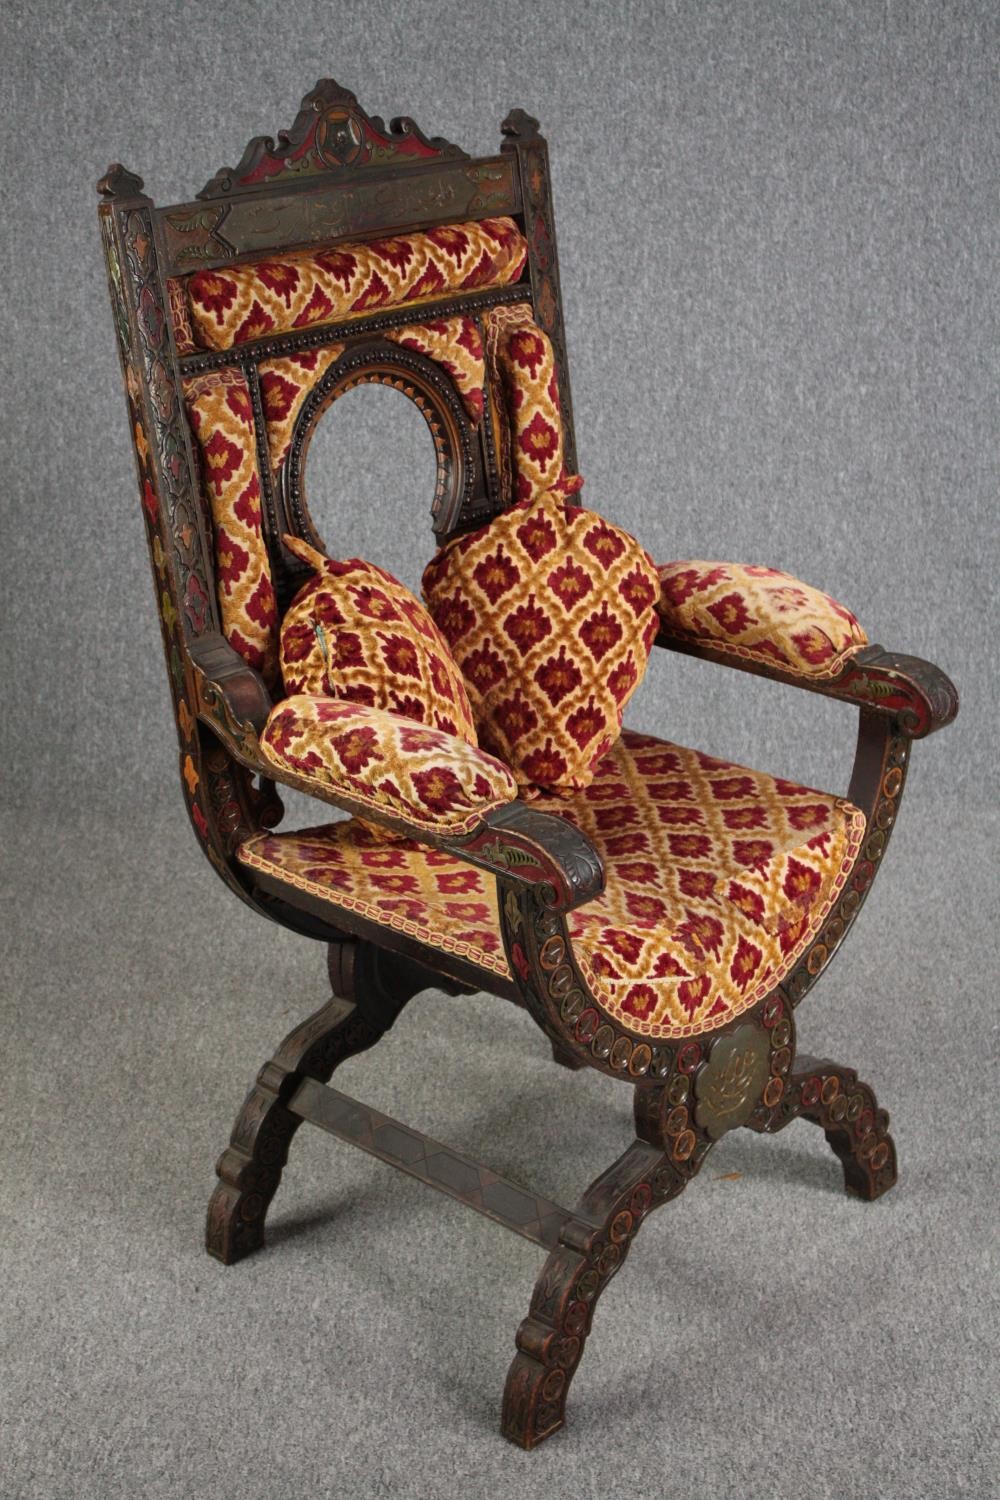 Throne chair, late 19th century polychrome of Eastern influence, signed or inscribed to the front. - Image 2 of 8